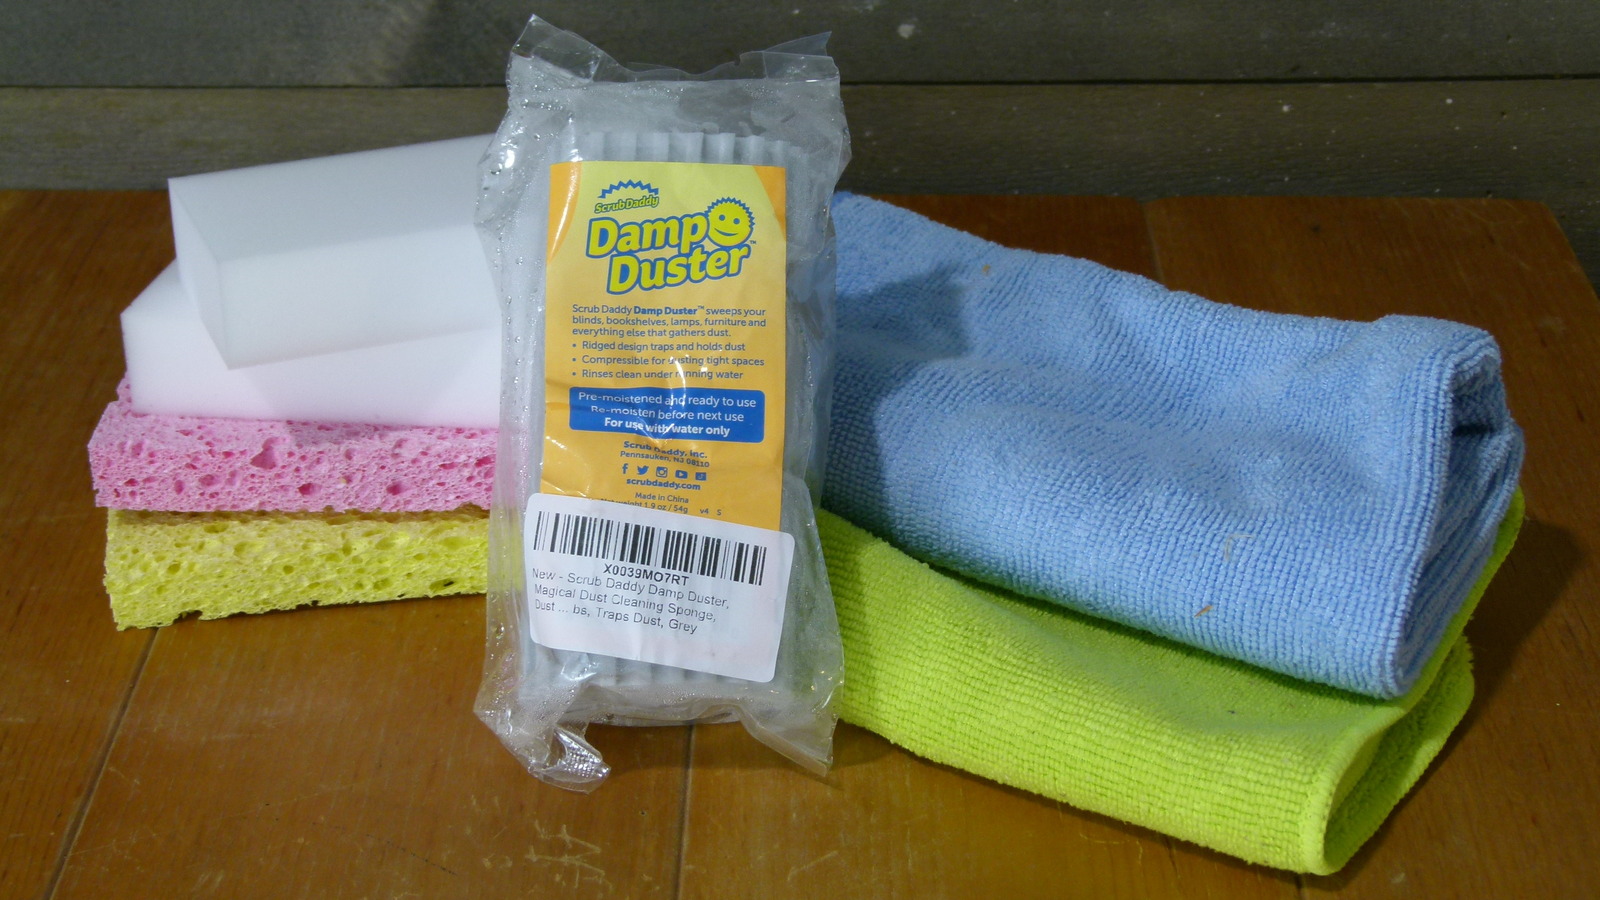 Scrub Daddy Damp Duster vs  Duster Review 